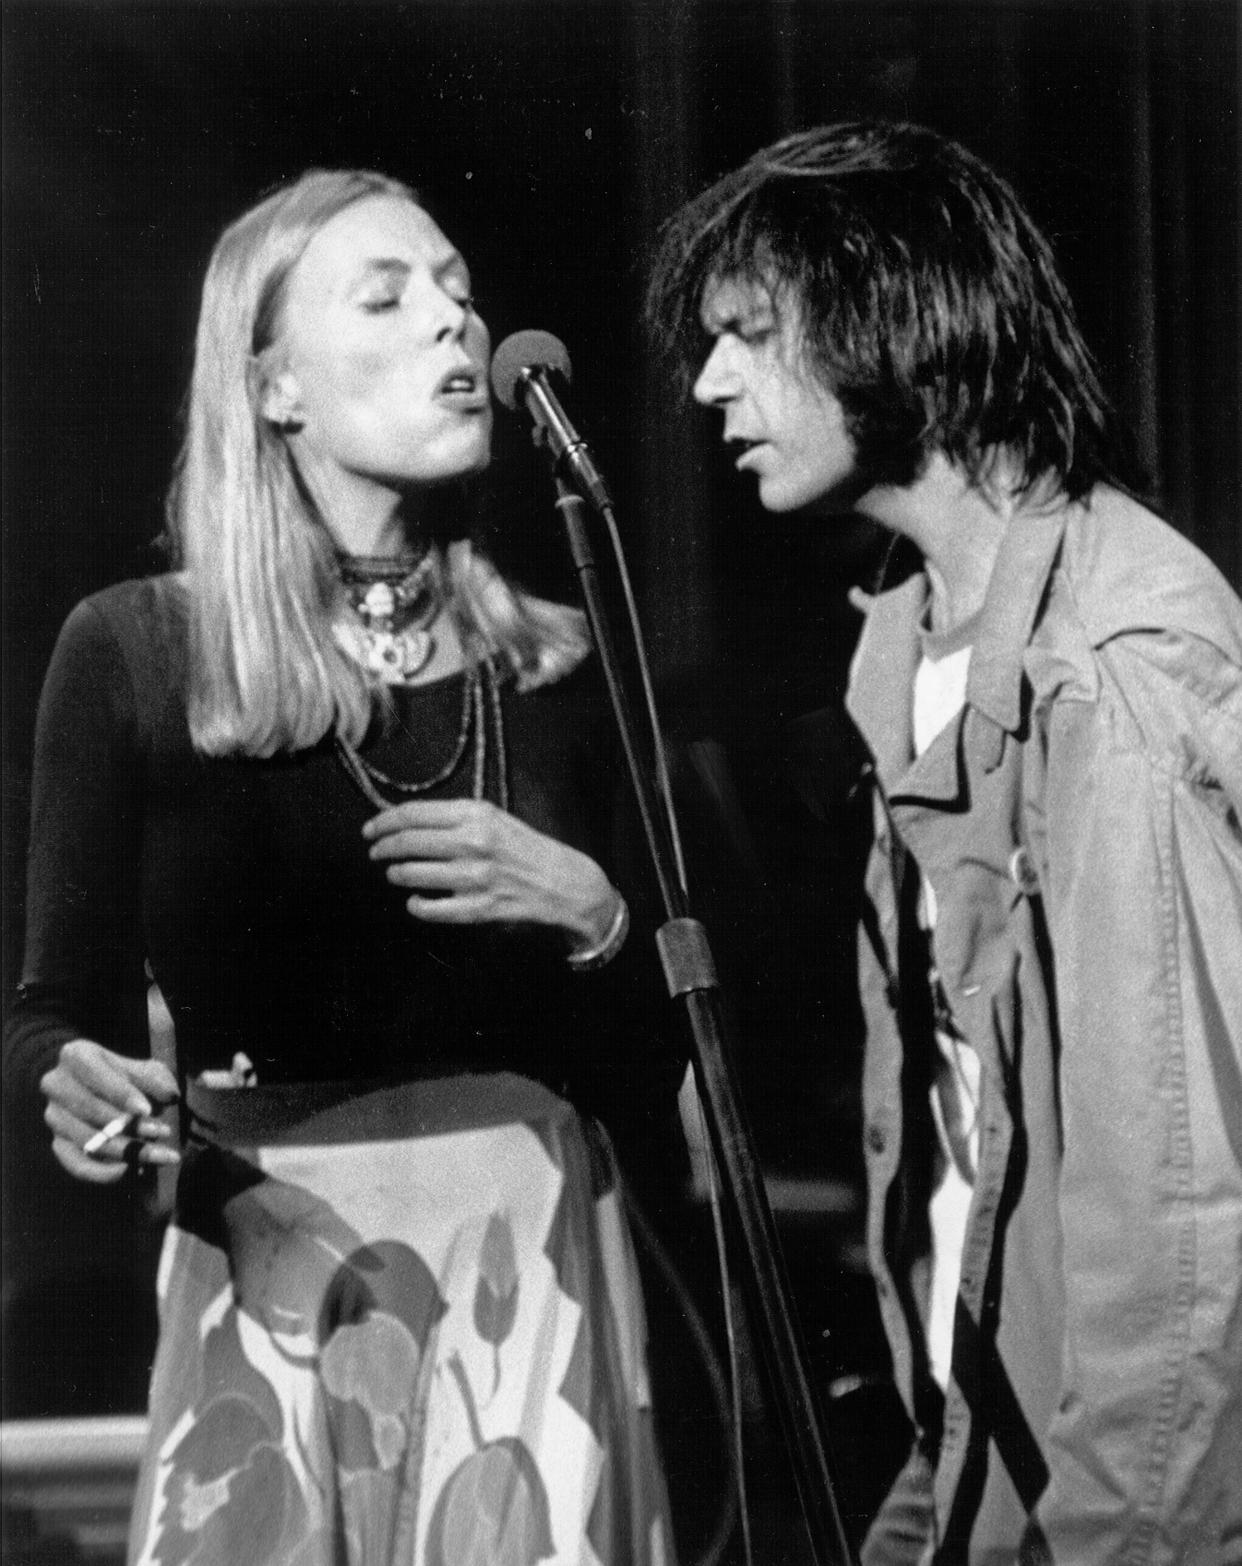 UNSPECIFIED - CIRCA 1970:  Photo of Neil Young & Joni Mitchell  (Photo by Larry Hulst/Michael Ochs Archives/Getty Images)